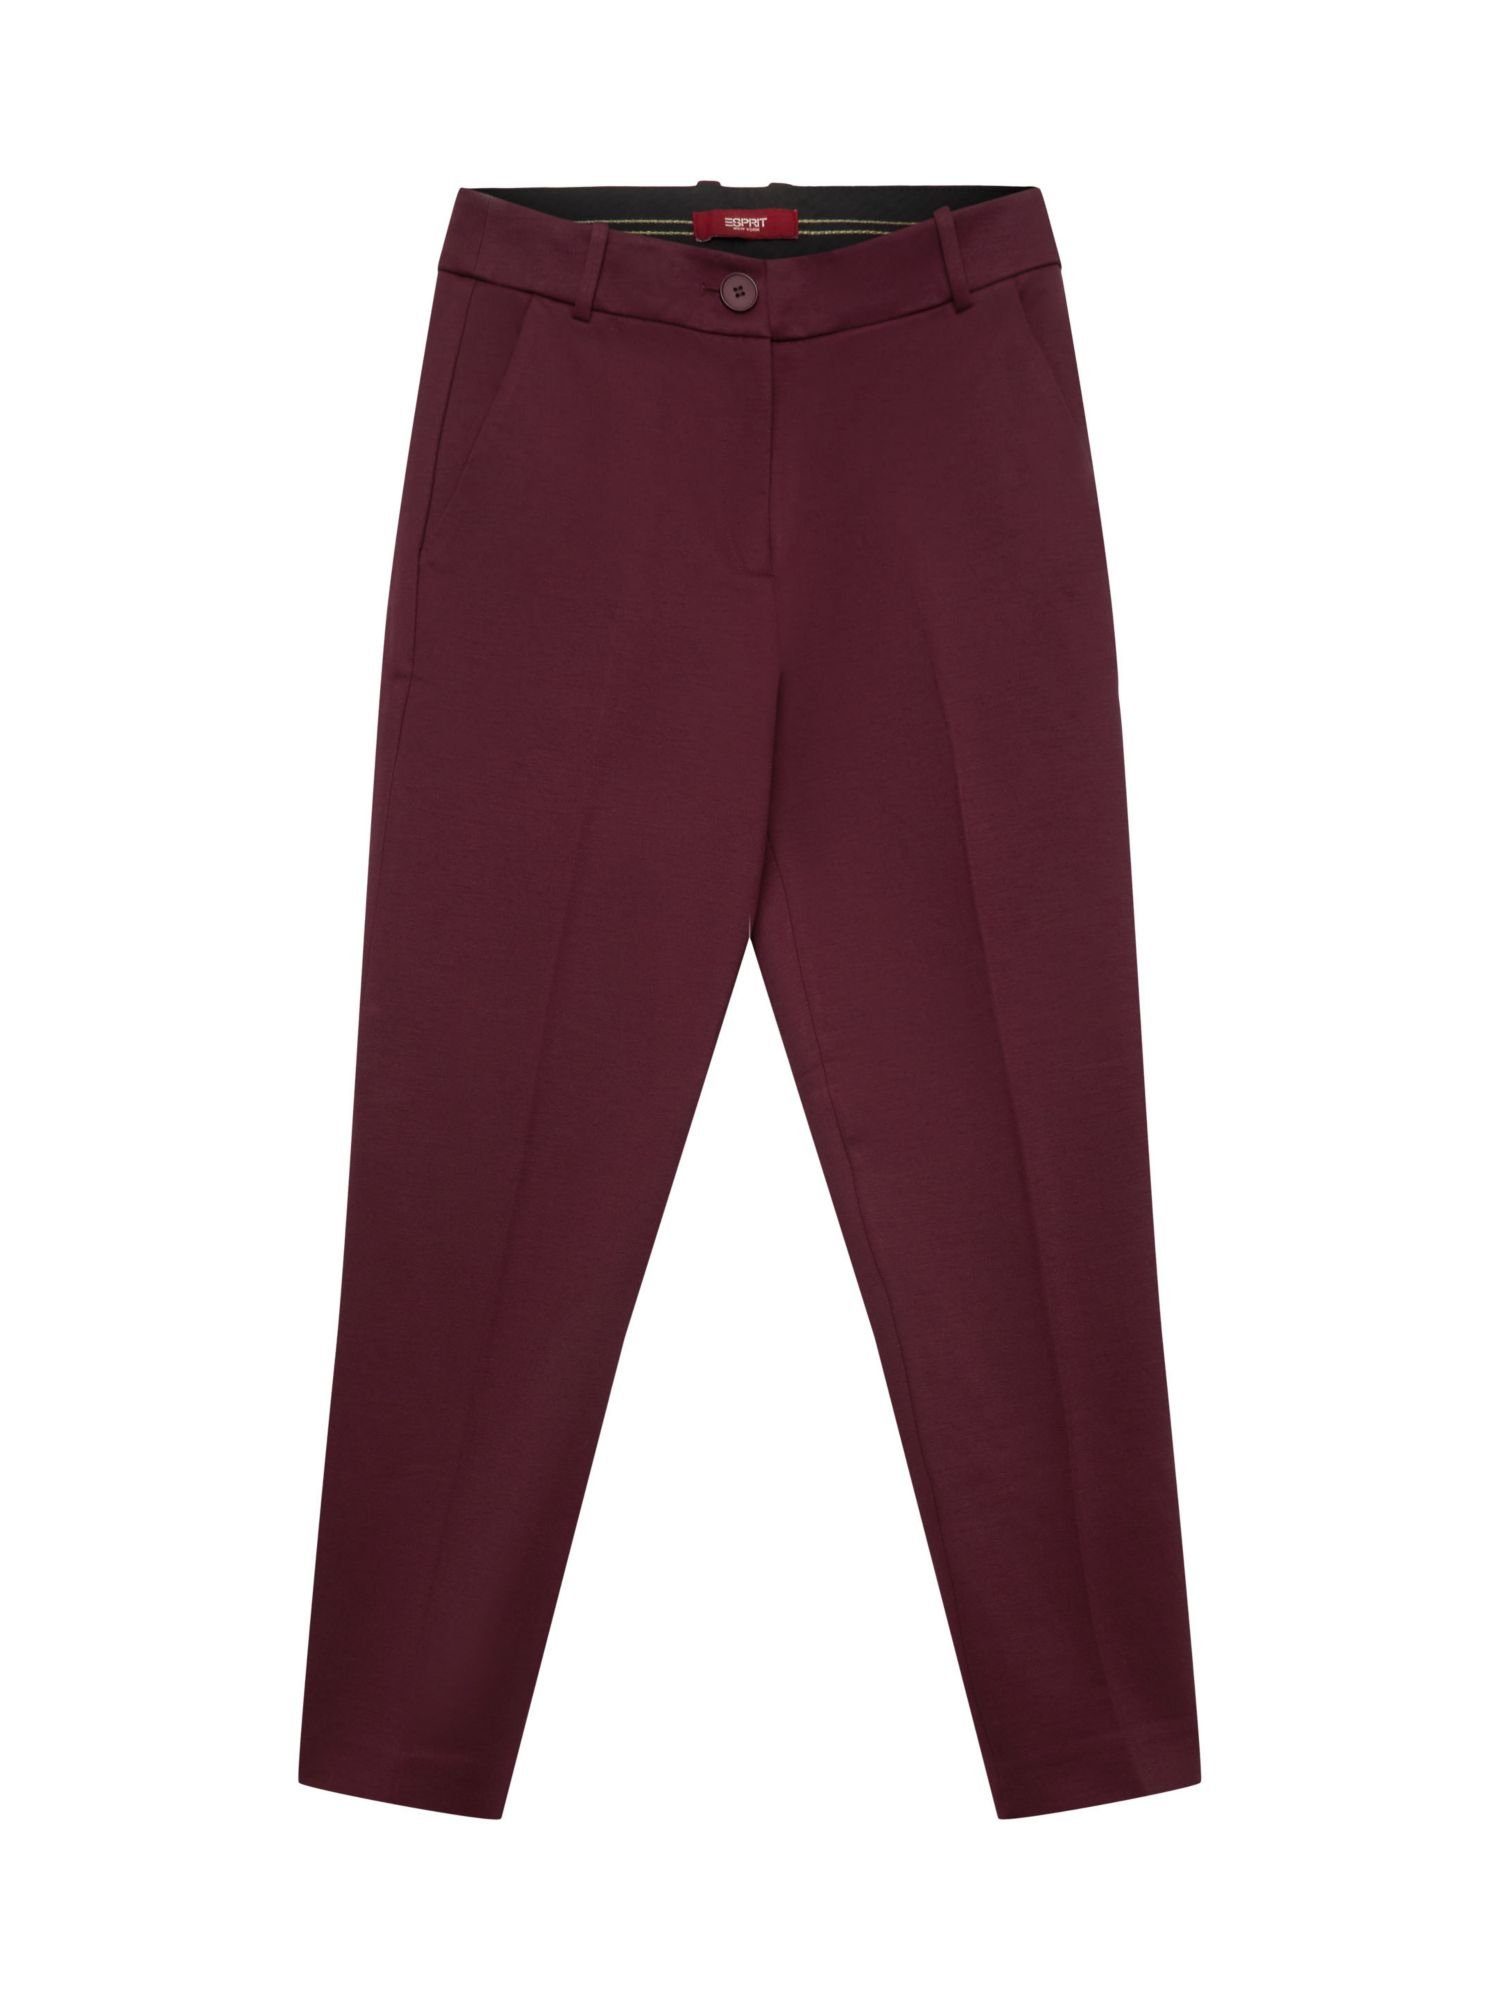 SPORTY Pants Stretch-Hose Mix Tapered AUBERGINE Match Collection & Esprit PUNTO